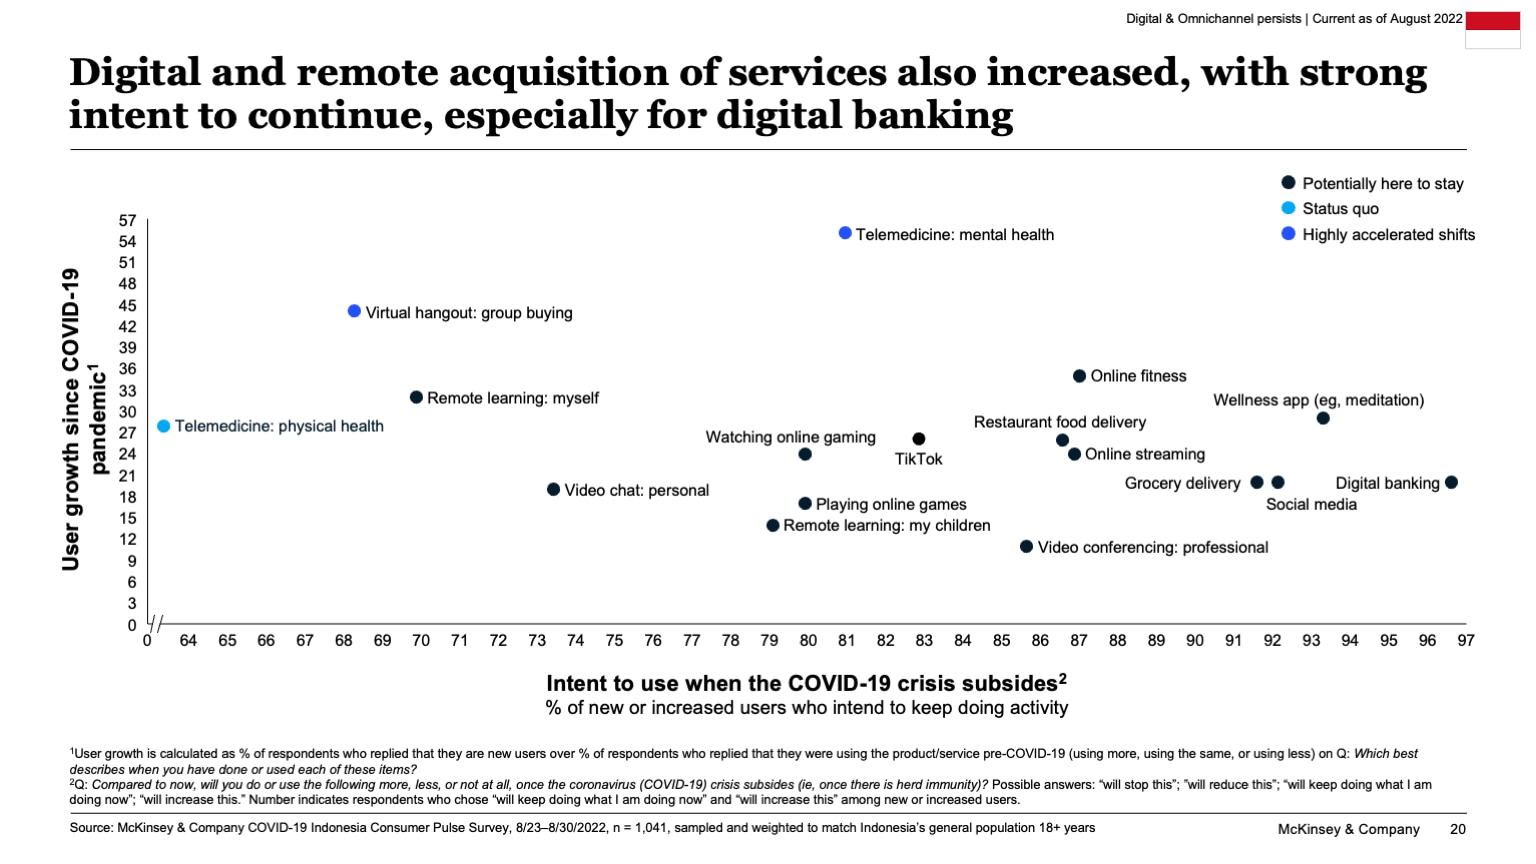 Digital and remote acquisition of services also increased, with strong intent to continue, especially for digital banking